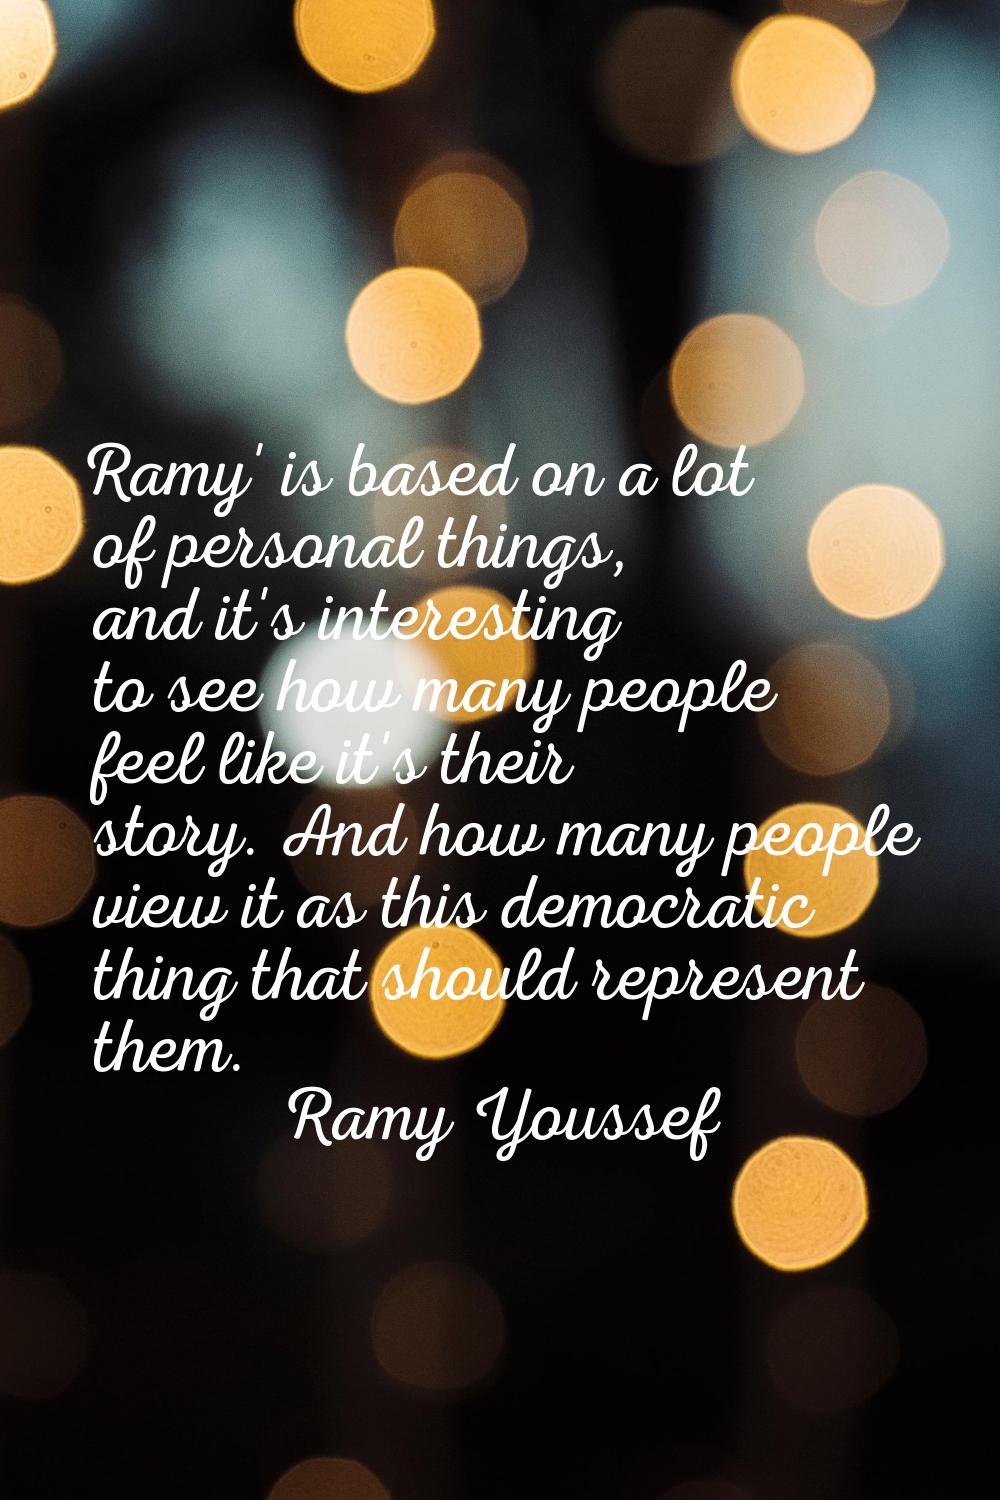 Ramy' is based on a lot of personal things, and it's interesting to see how many people feel like i